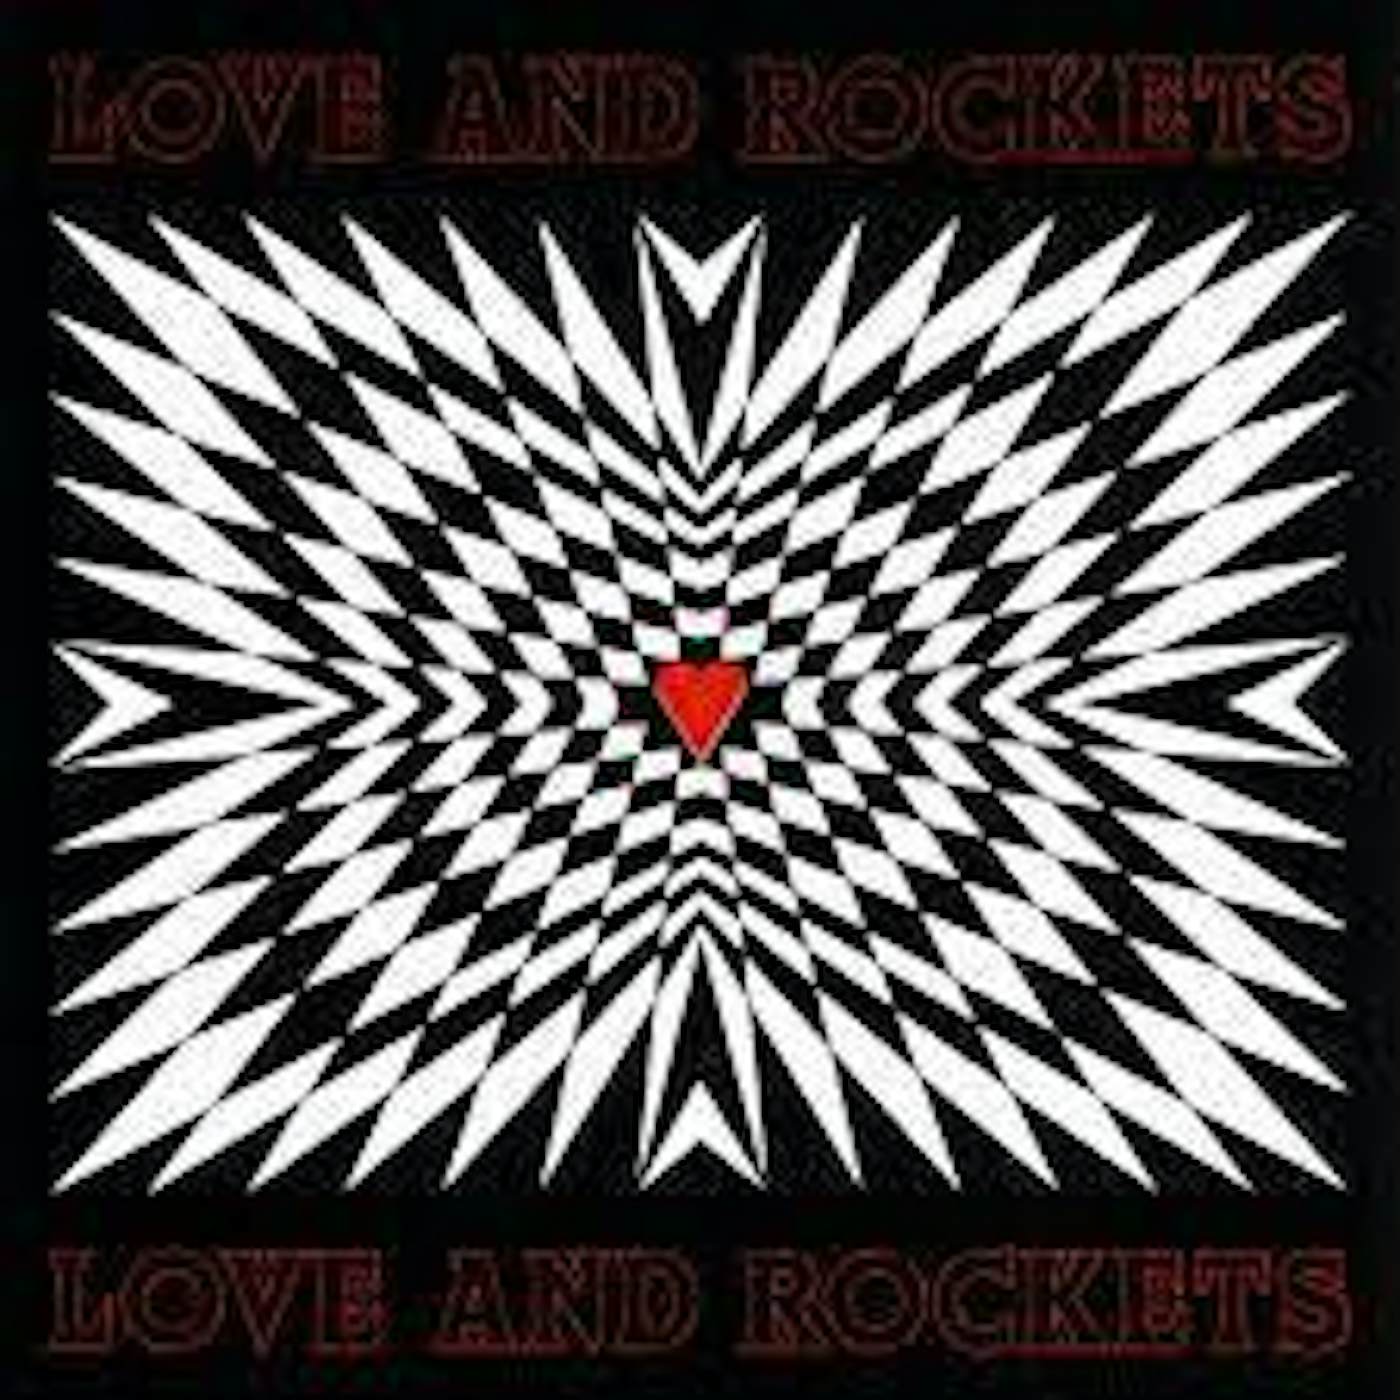  Love and Rockets S/T Vinyl Record